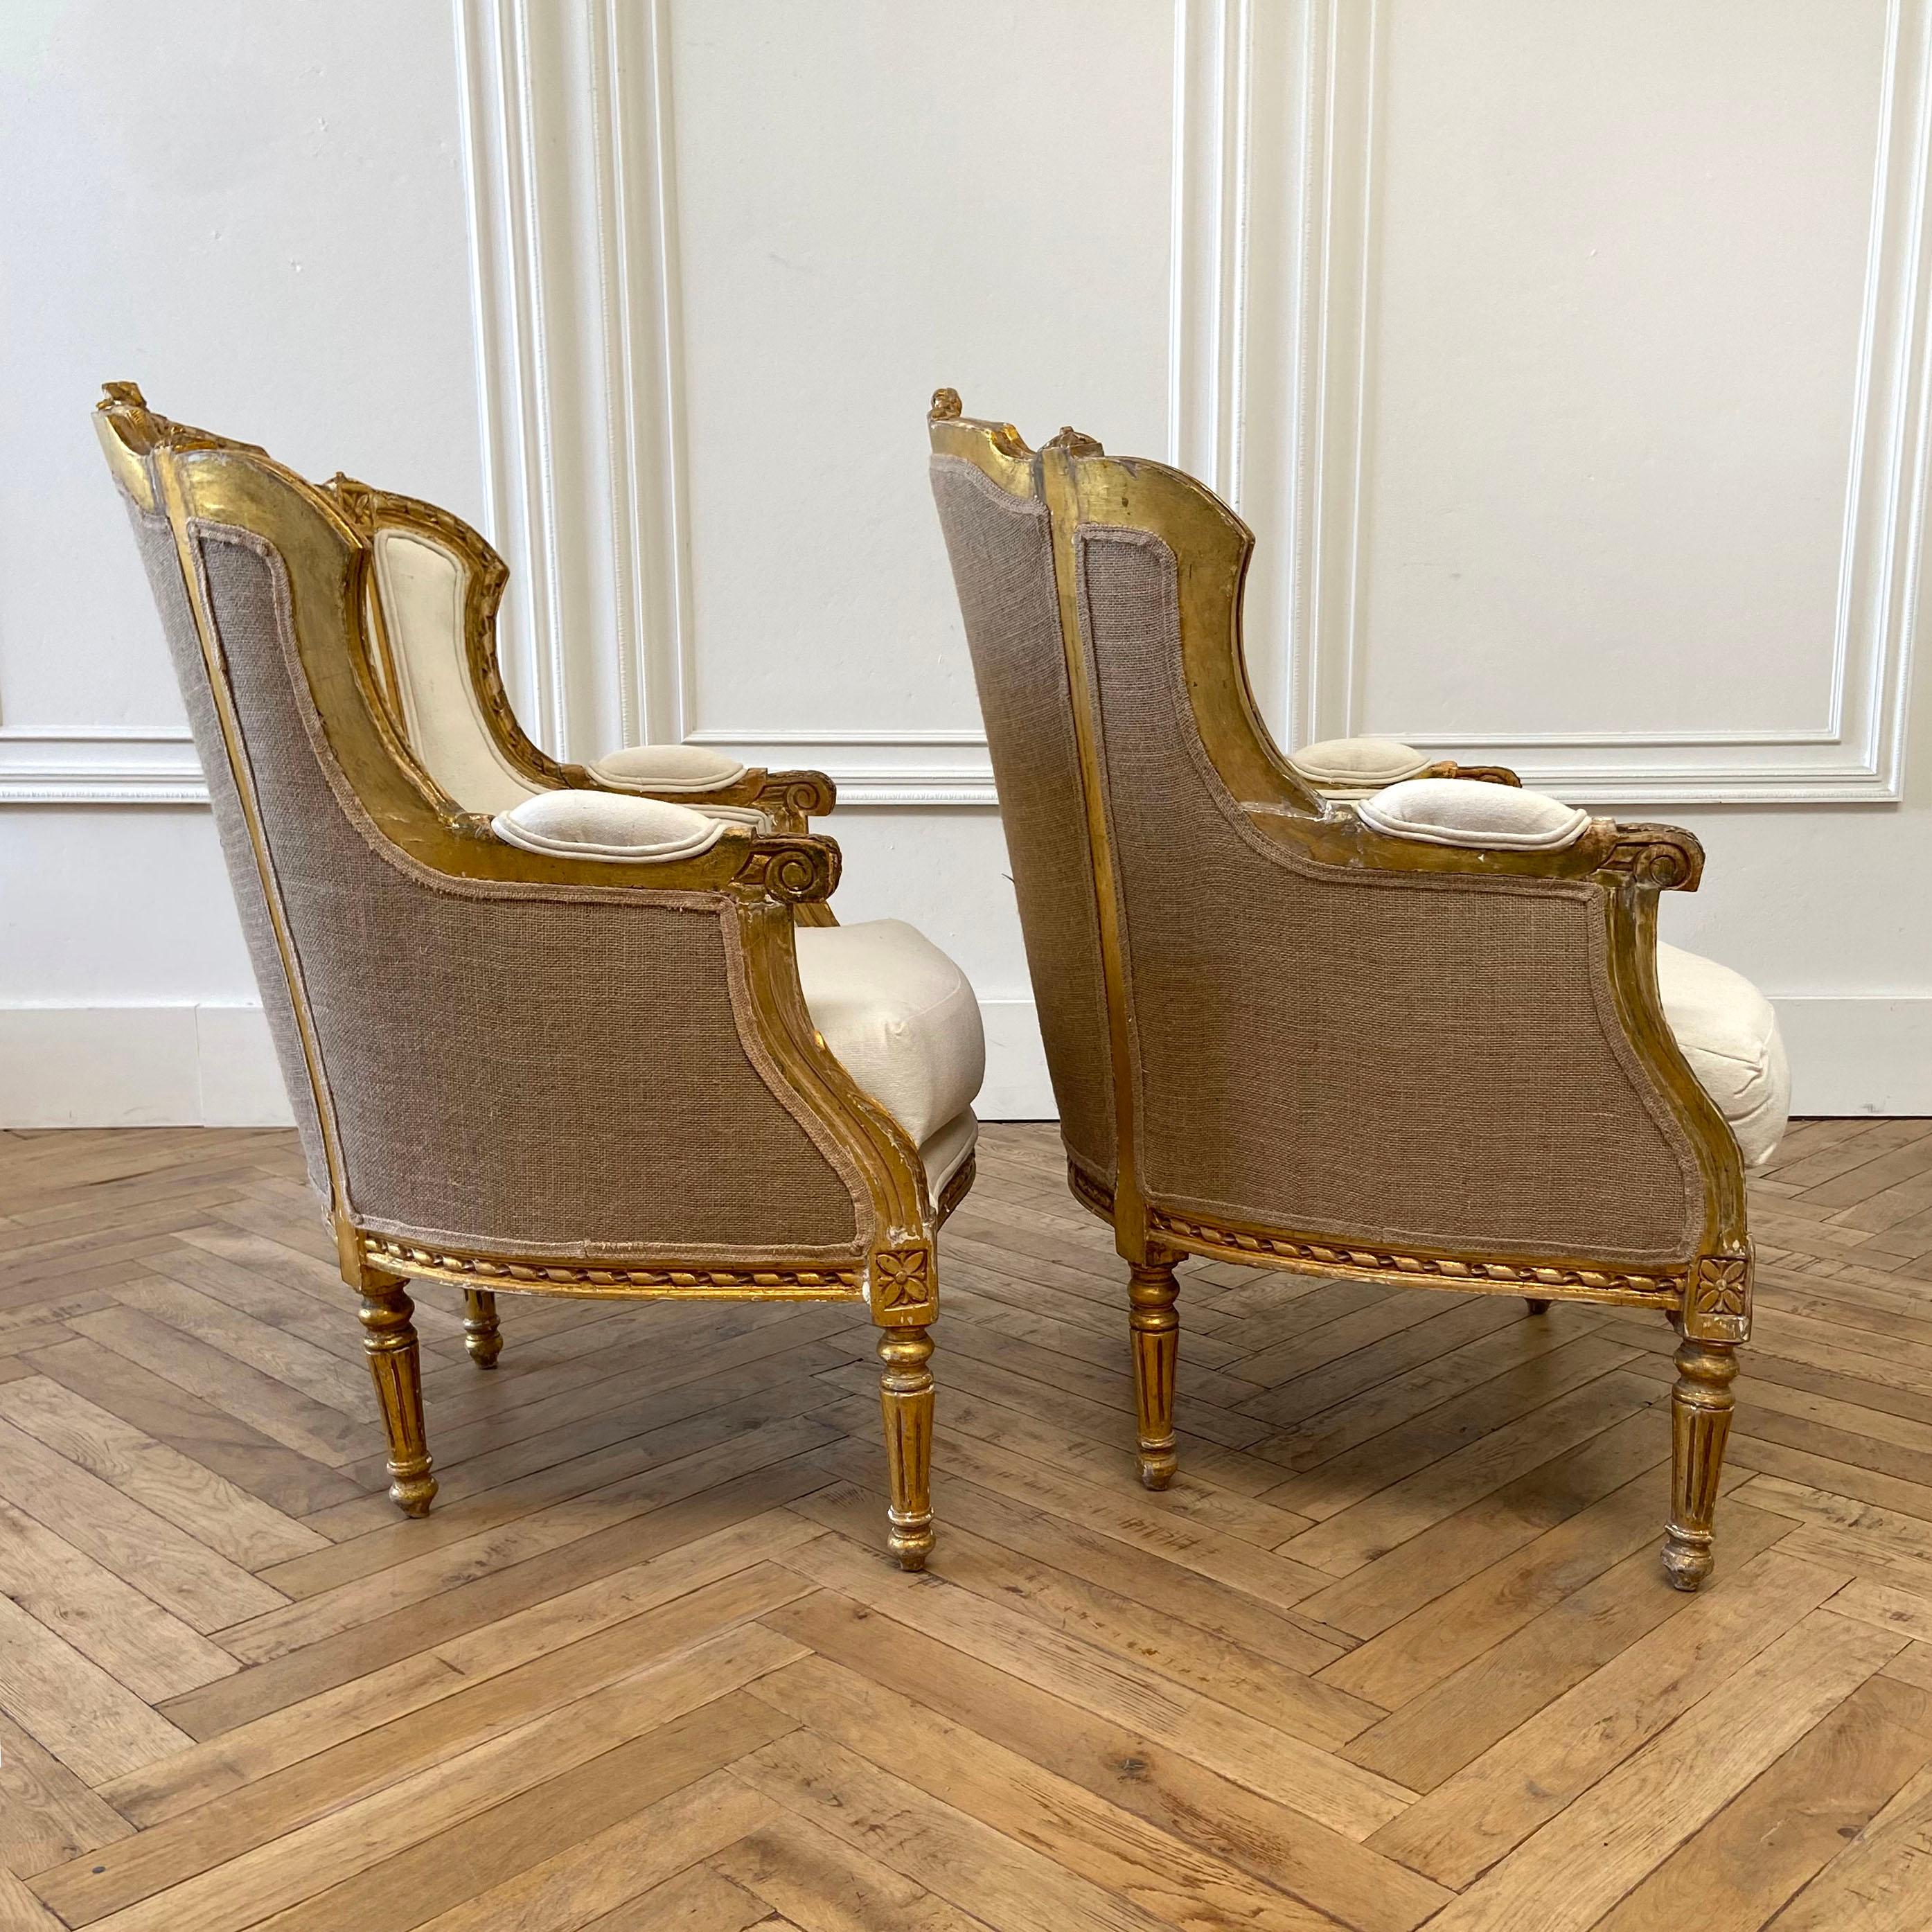 Pair of vintage Louis XVI style wing back bergère chairs upholstered in a natural canvas duck. Carved with large roses and ribbon detailing at the top of chairs and classic fluted legs, with a medallion carving. Natural distressed wood patina,